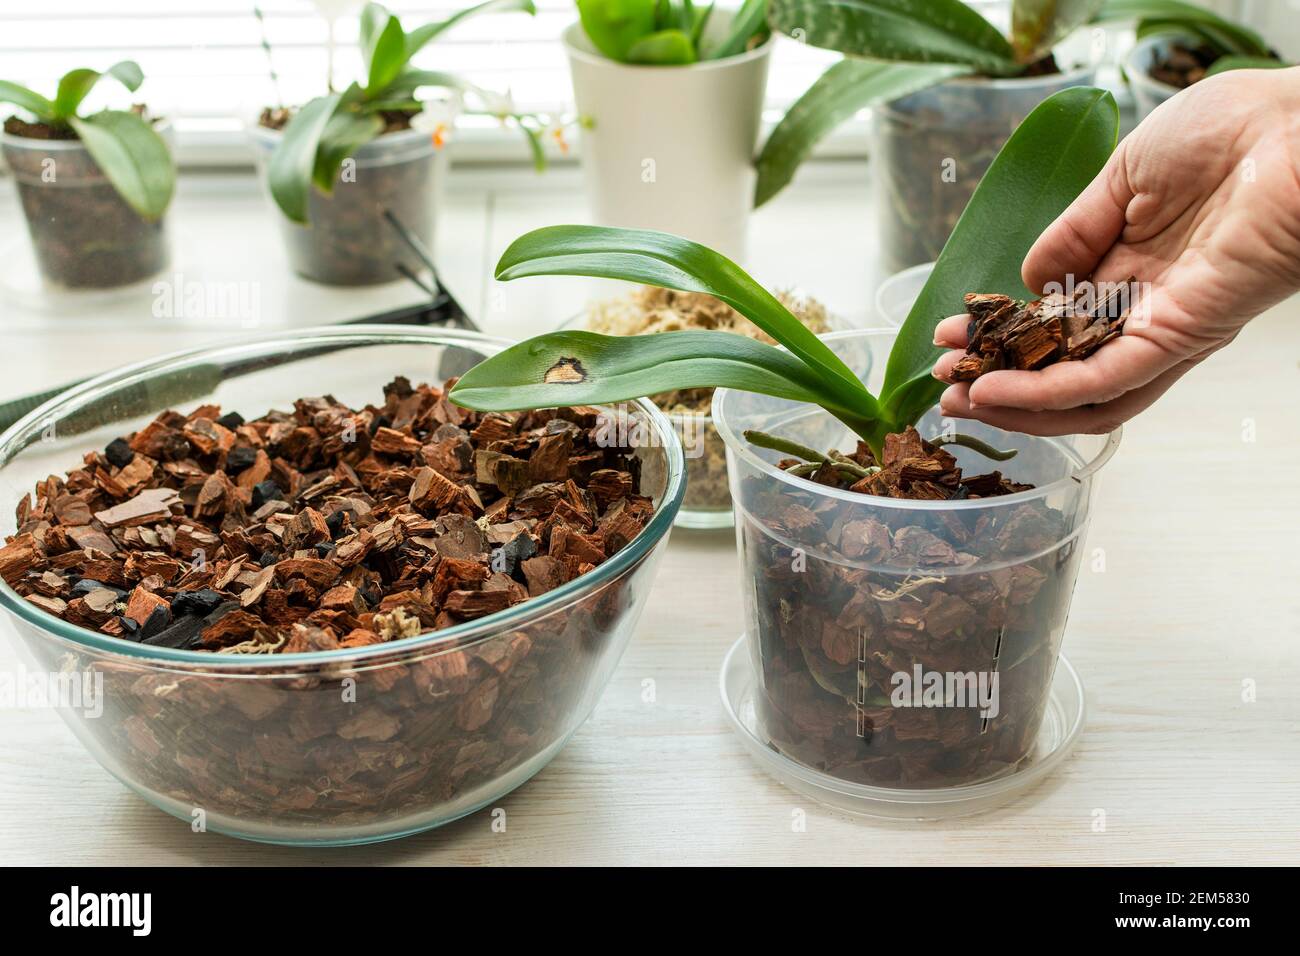 Transplant orchids at home. Planting tools with bark soil, pot and moss.  Orchid transplant process Stock Photo - Alamy